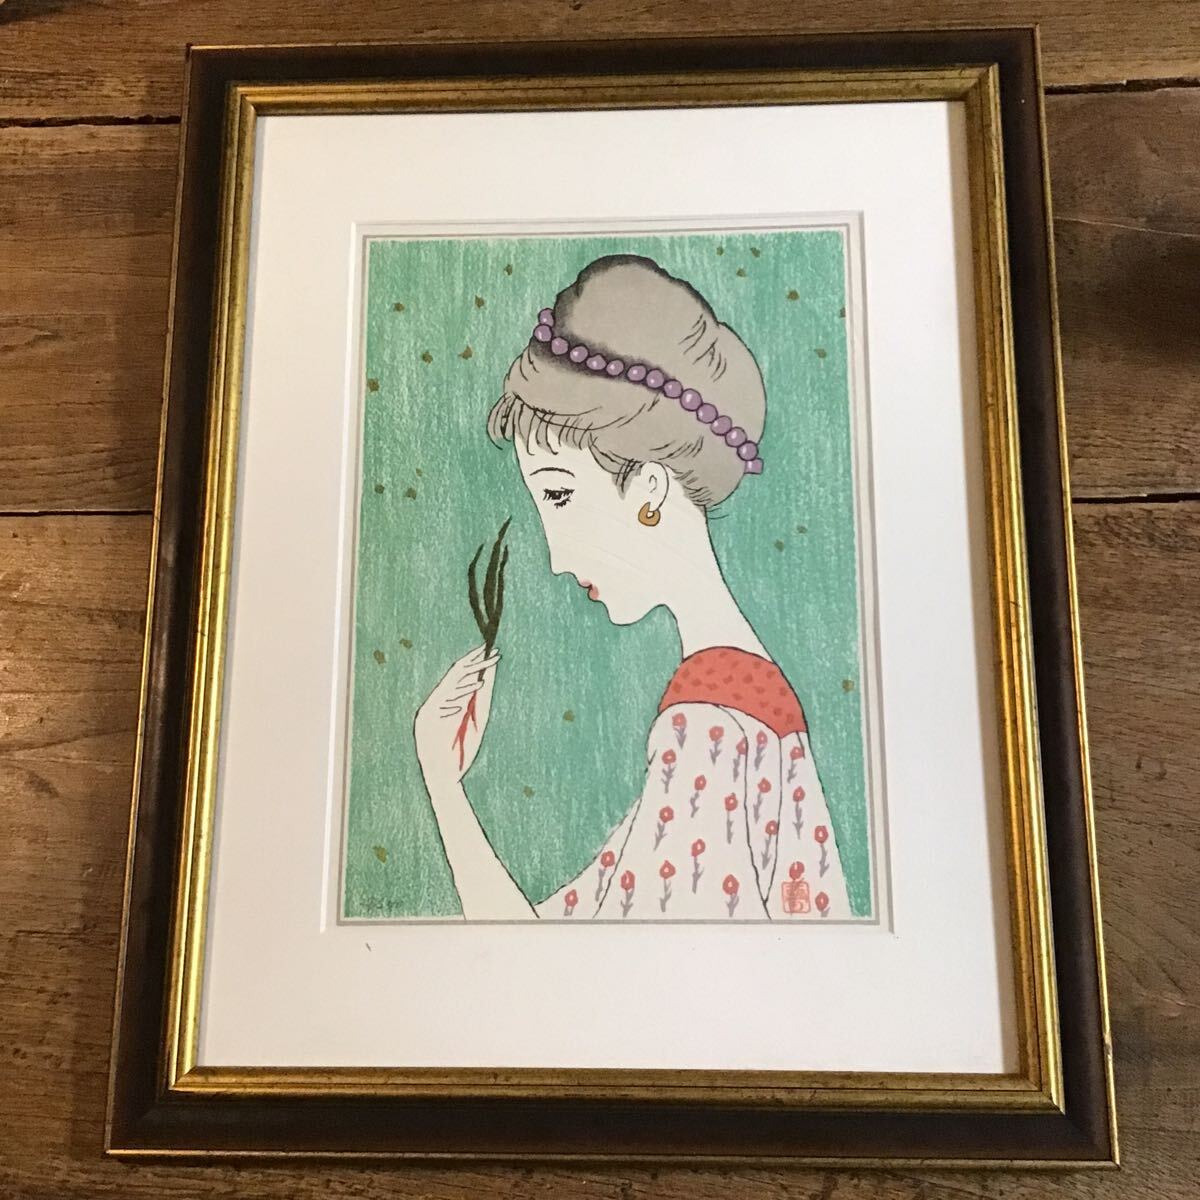 [Authentic work] Lithograph Yumeji Takehisa 27/250 Waiting for it Print High quality framed Gold painting Beautiful woman painting Woodblock print Young grass girl, artwork, print, woodblock print